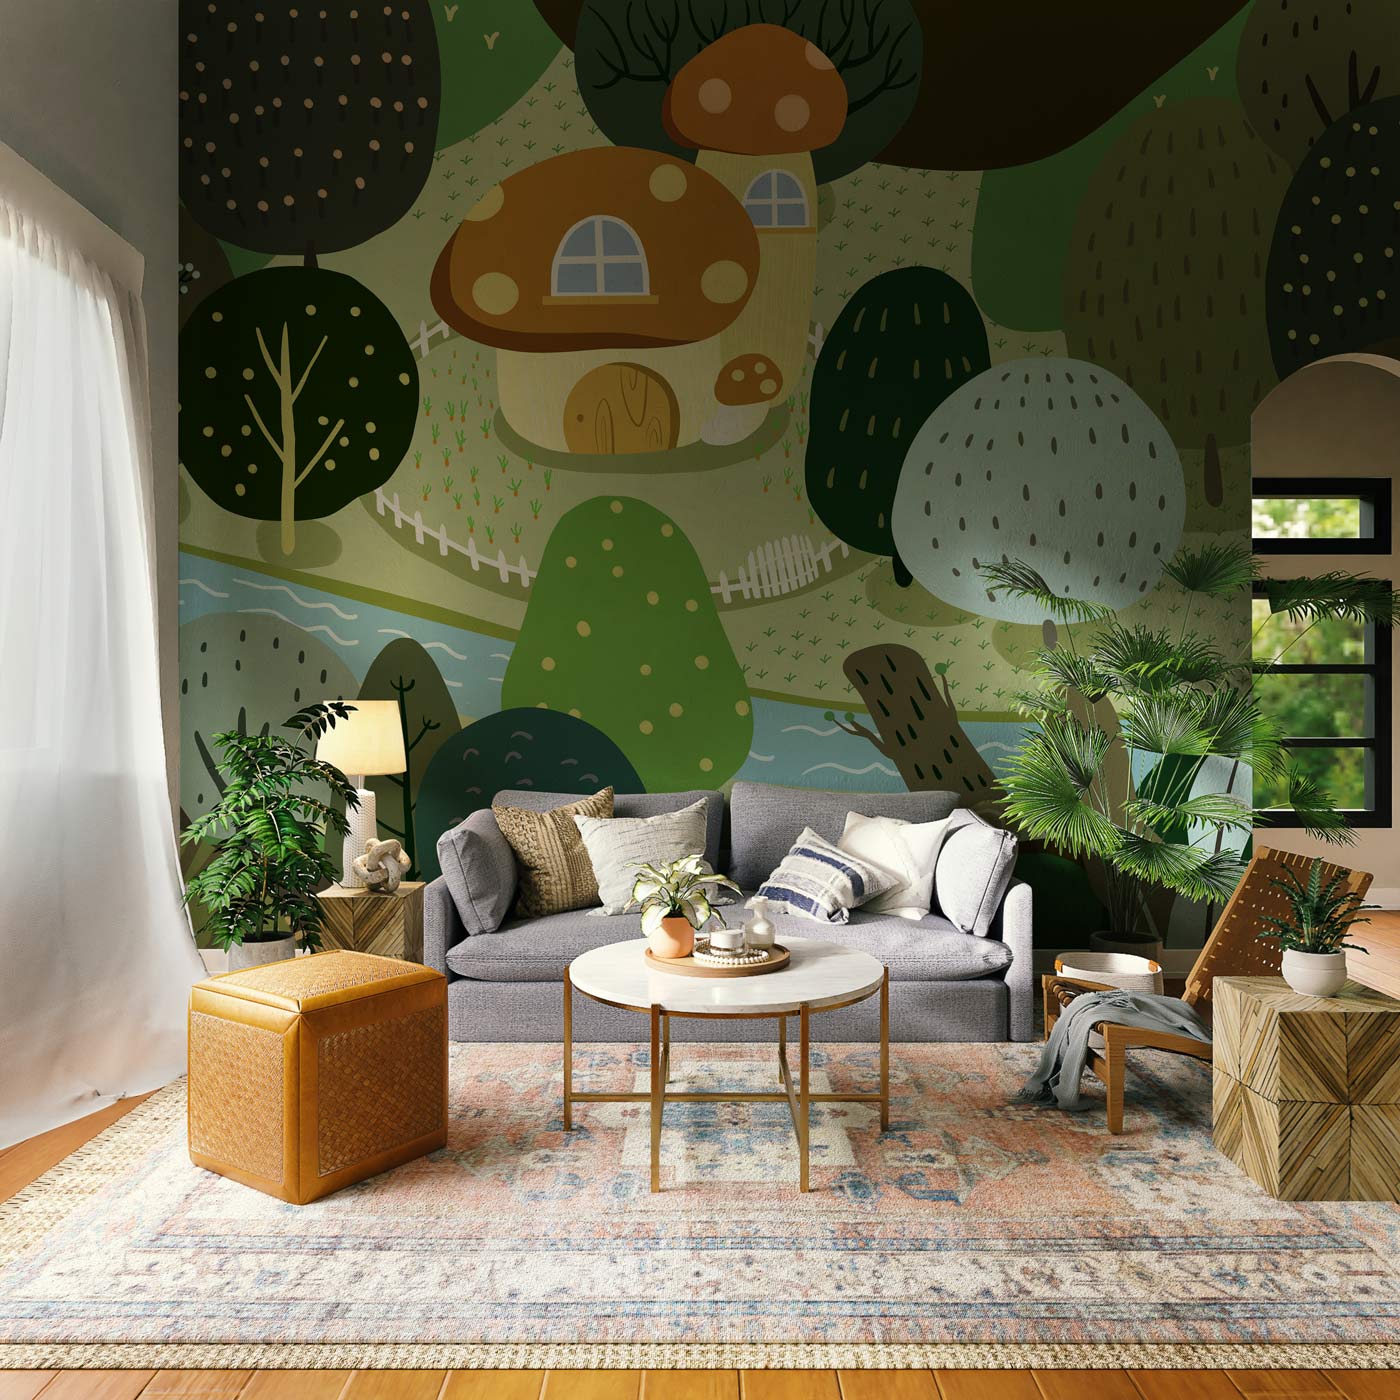 Trees in Cartoon Style Wallpaper Mural for Decorating the Living Room